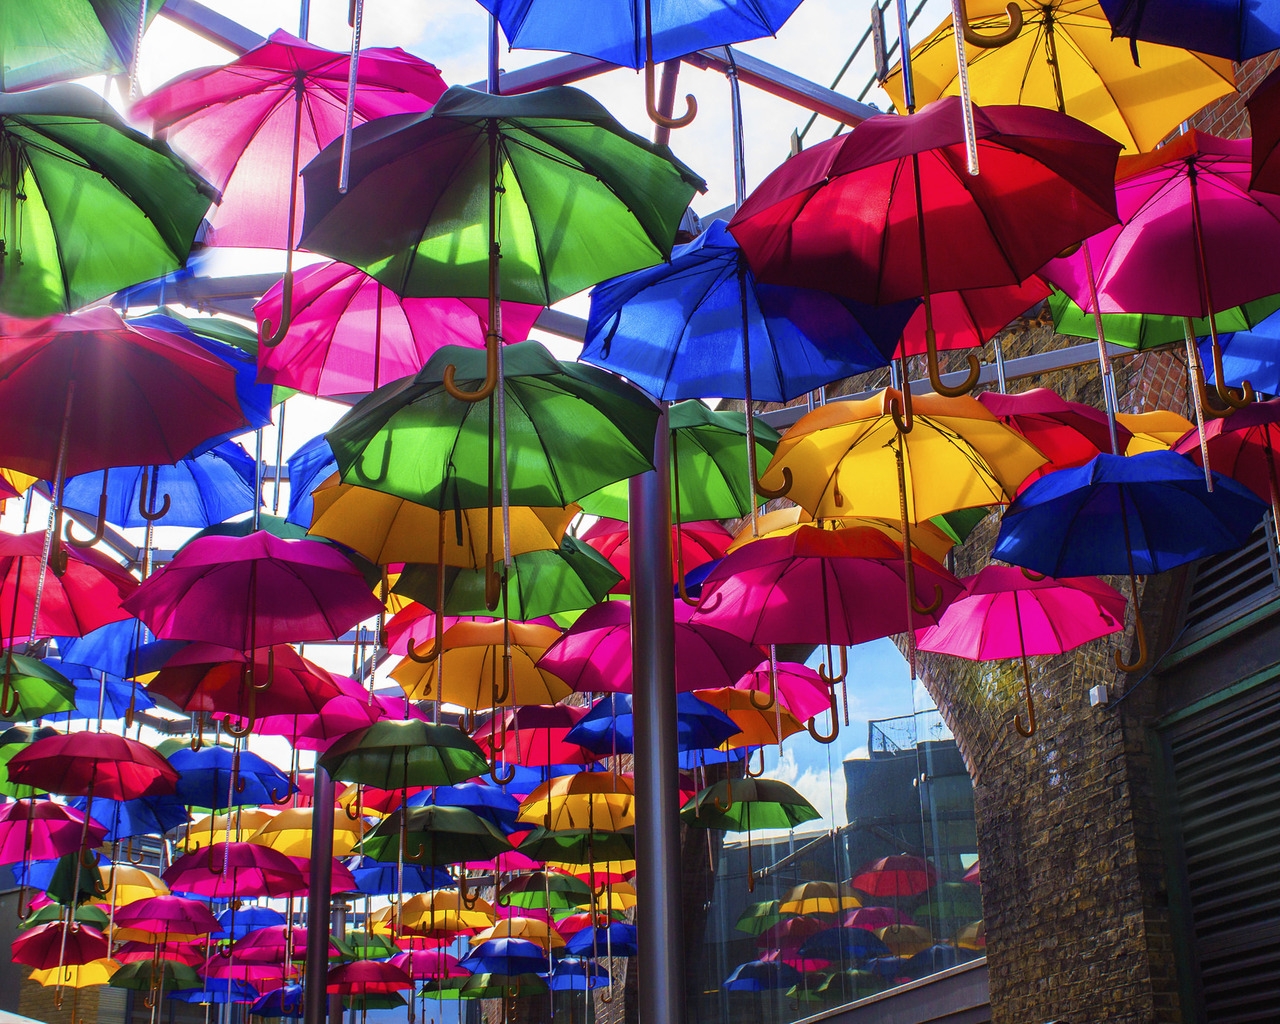 Opened Colorful Umbrellas for 1280 x 1024 resolution